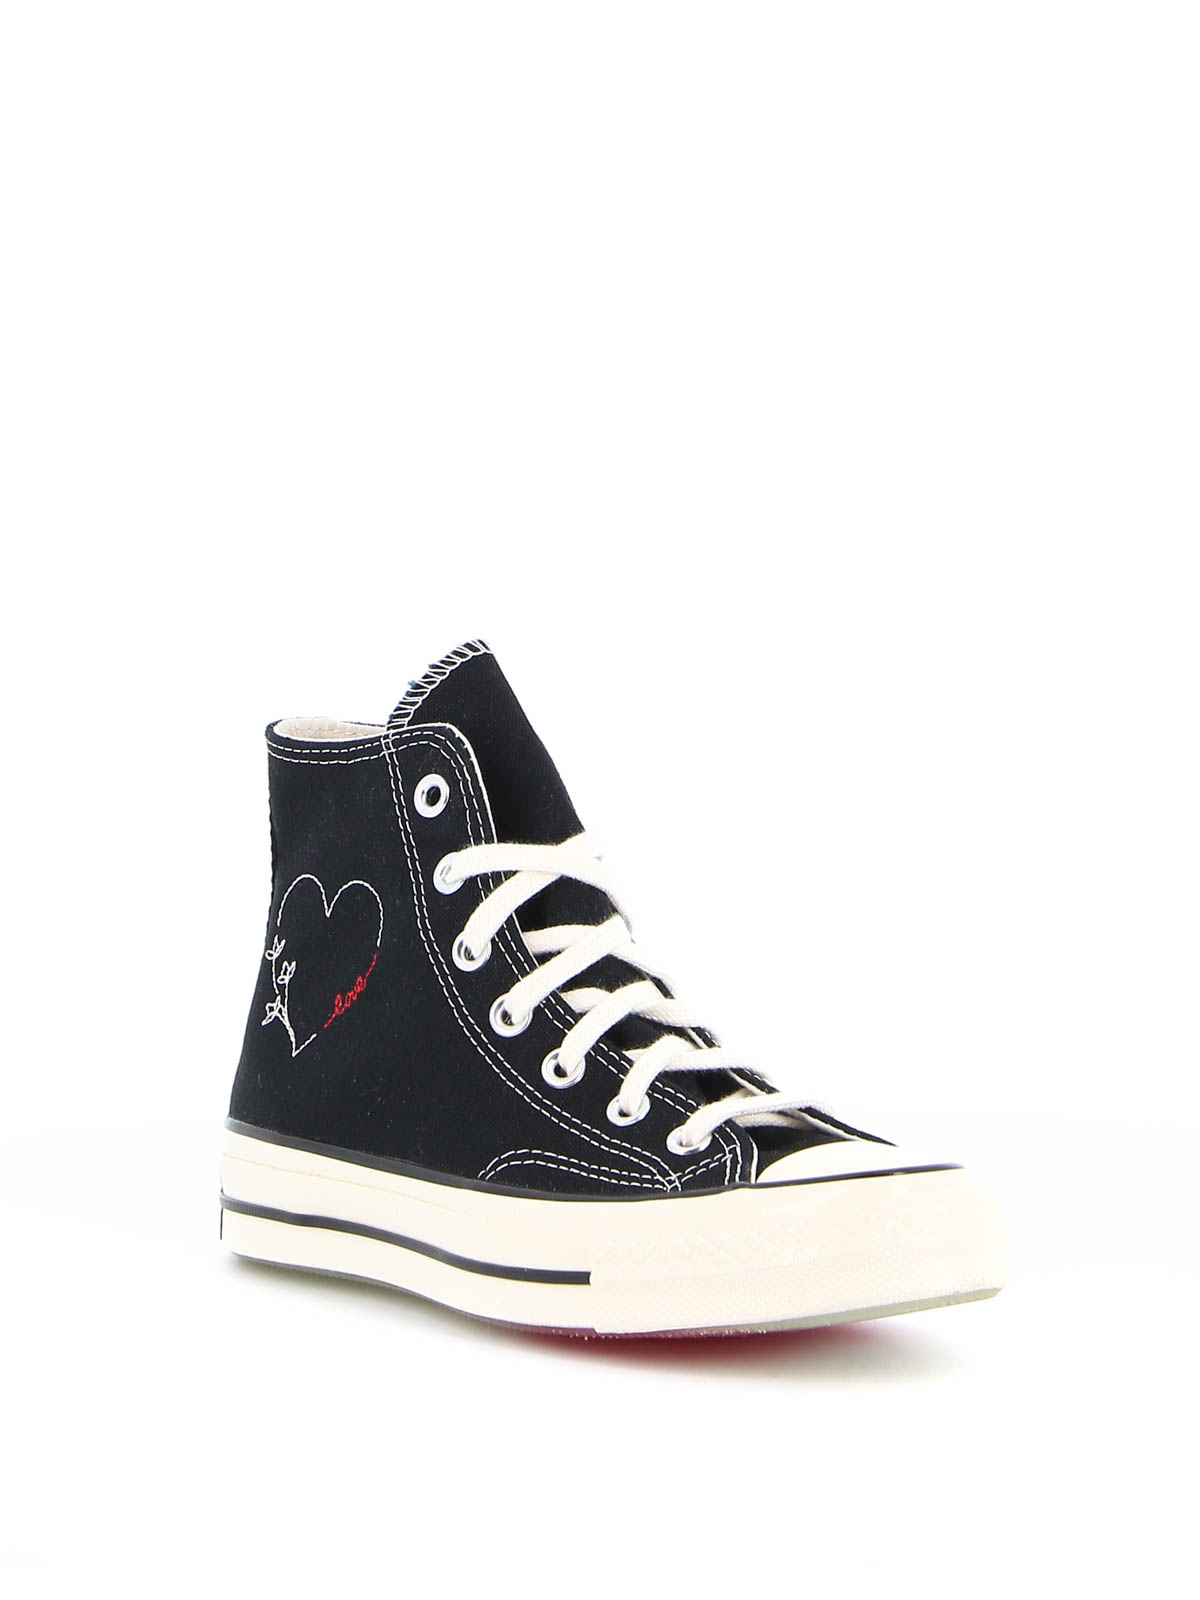 Trainers Converse - embroidery sneakers - 171118CC70 | iKRIX.com